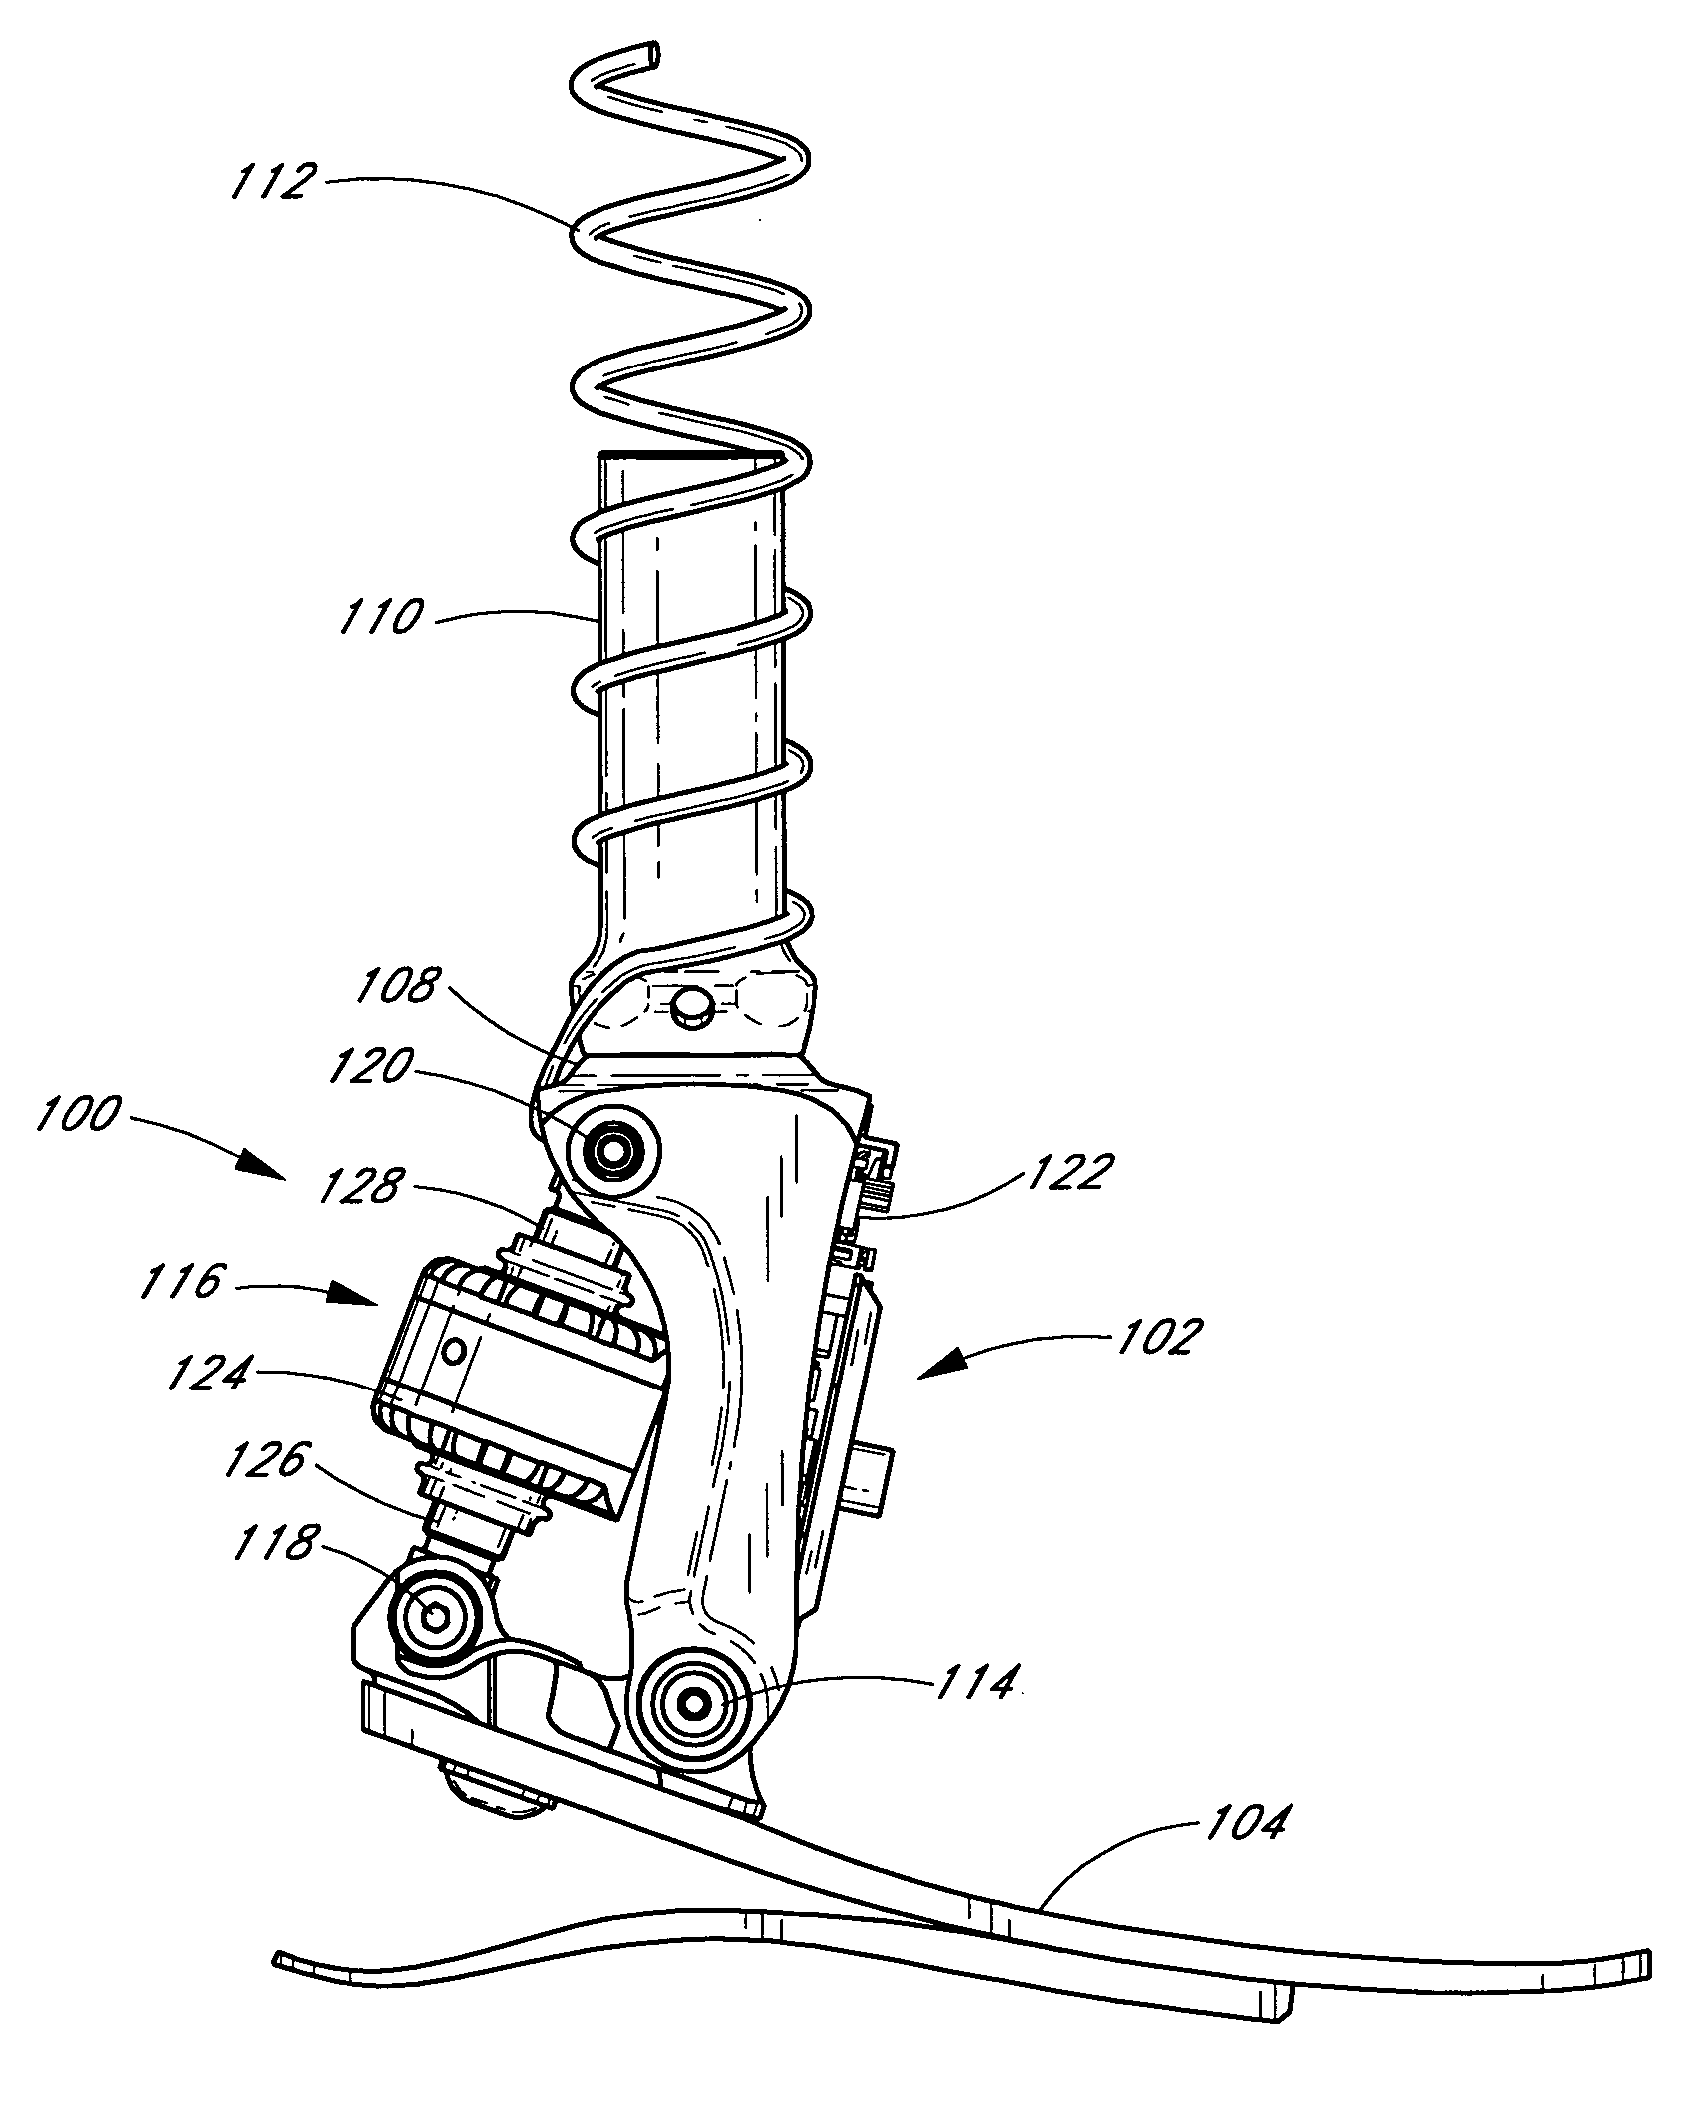 System and method for motion-controlled foot unit